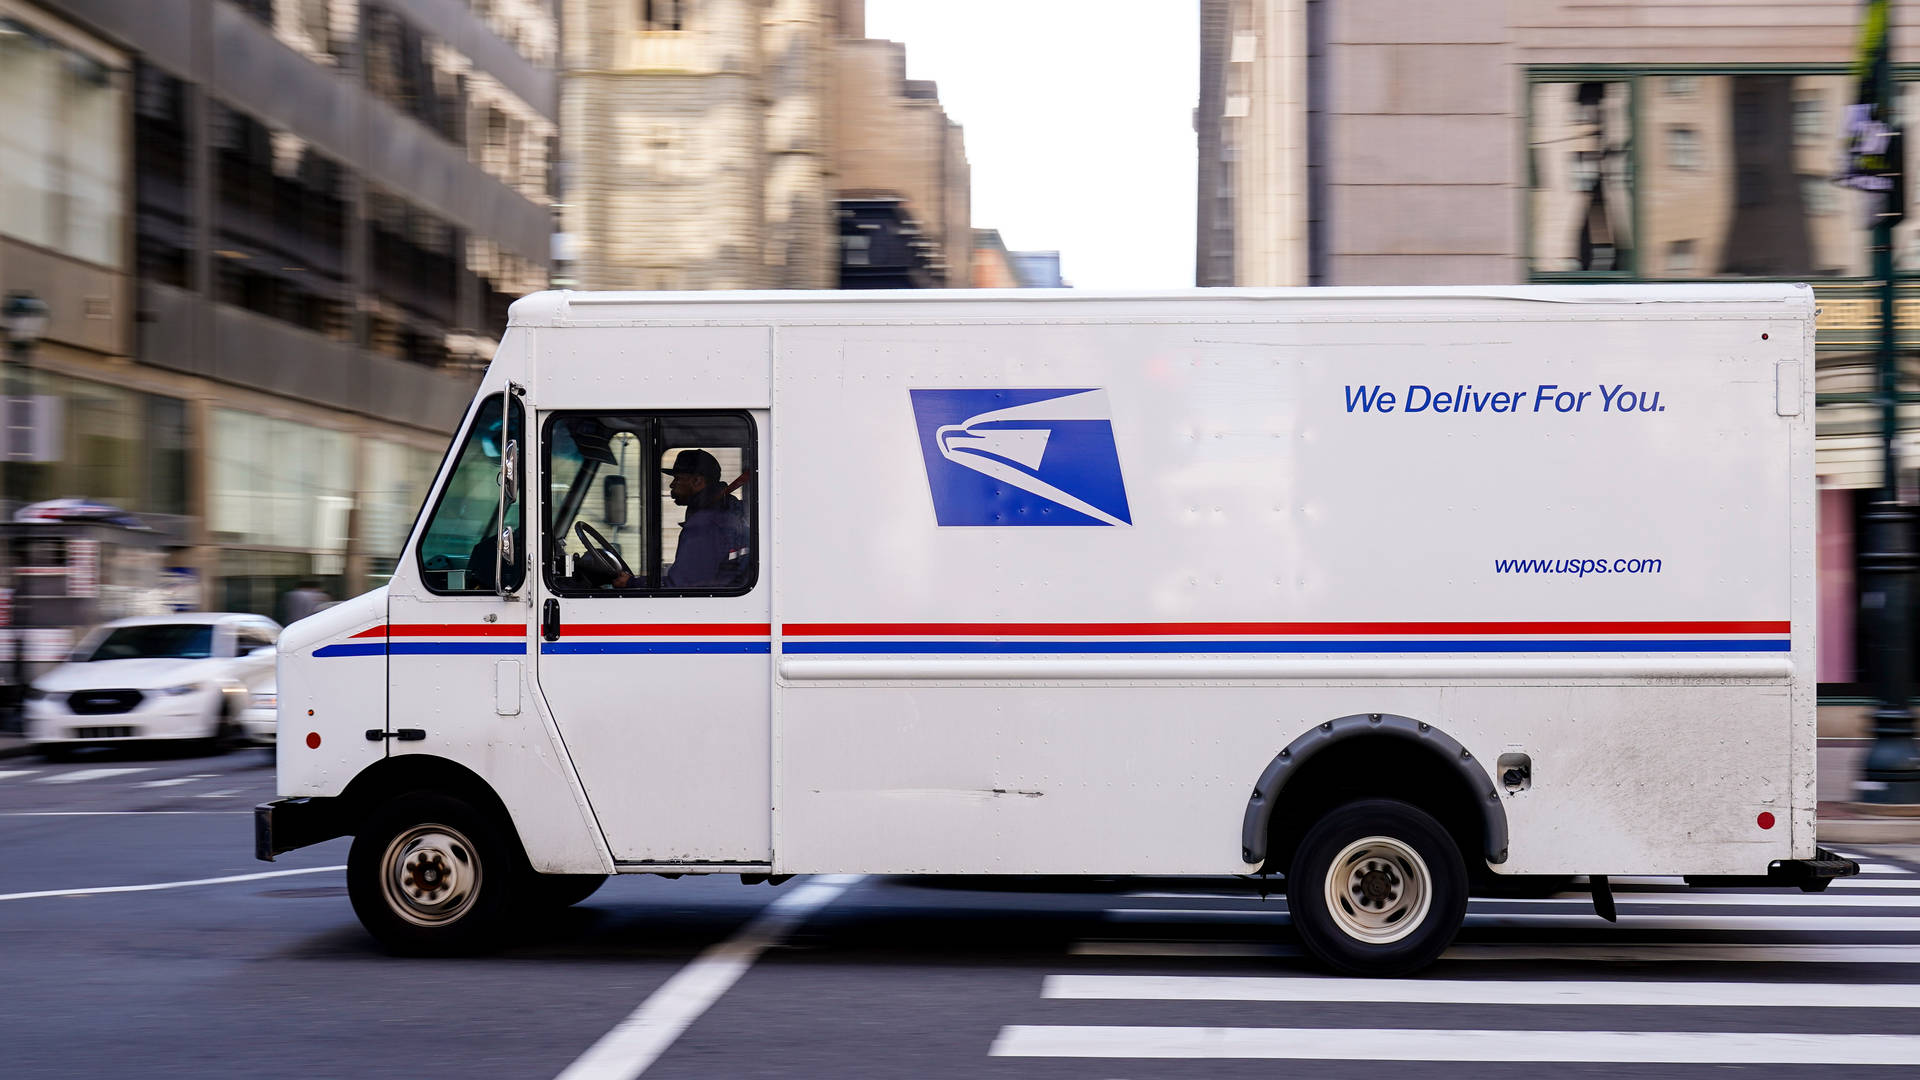 Moving USPS Tracking Truck Wallpaper